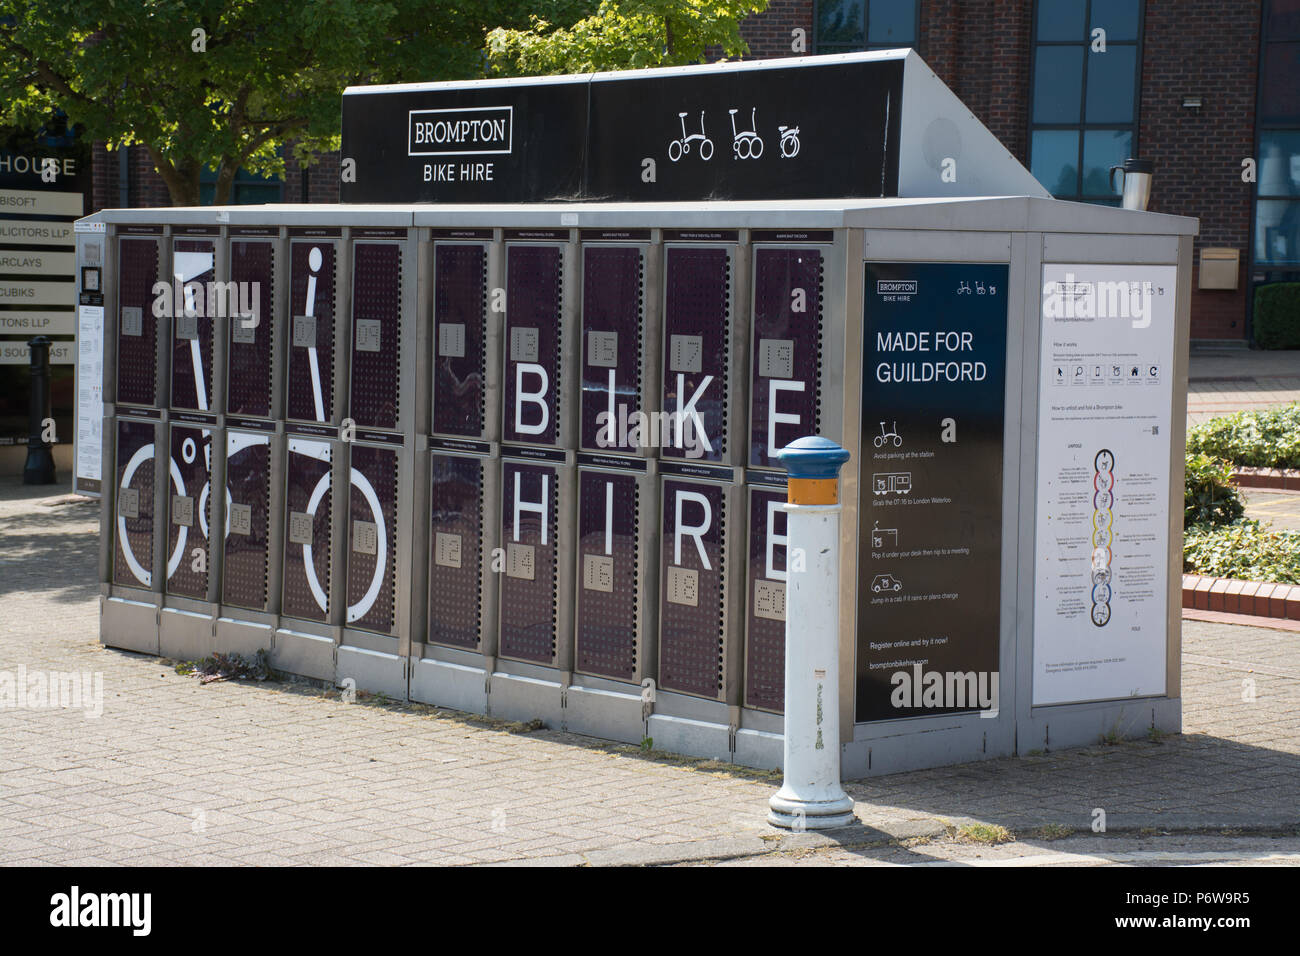 Self-service Brompton bike hire facility at the railway station in Guildford town, Surrey, UK Stock Photo